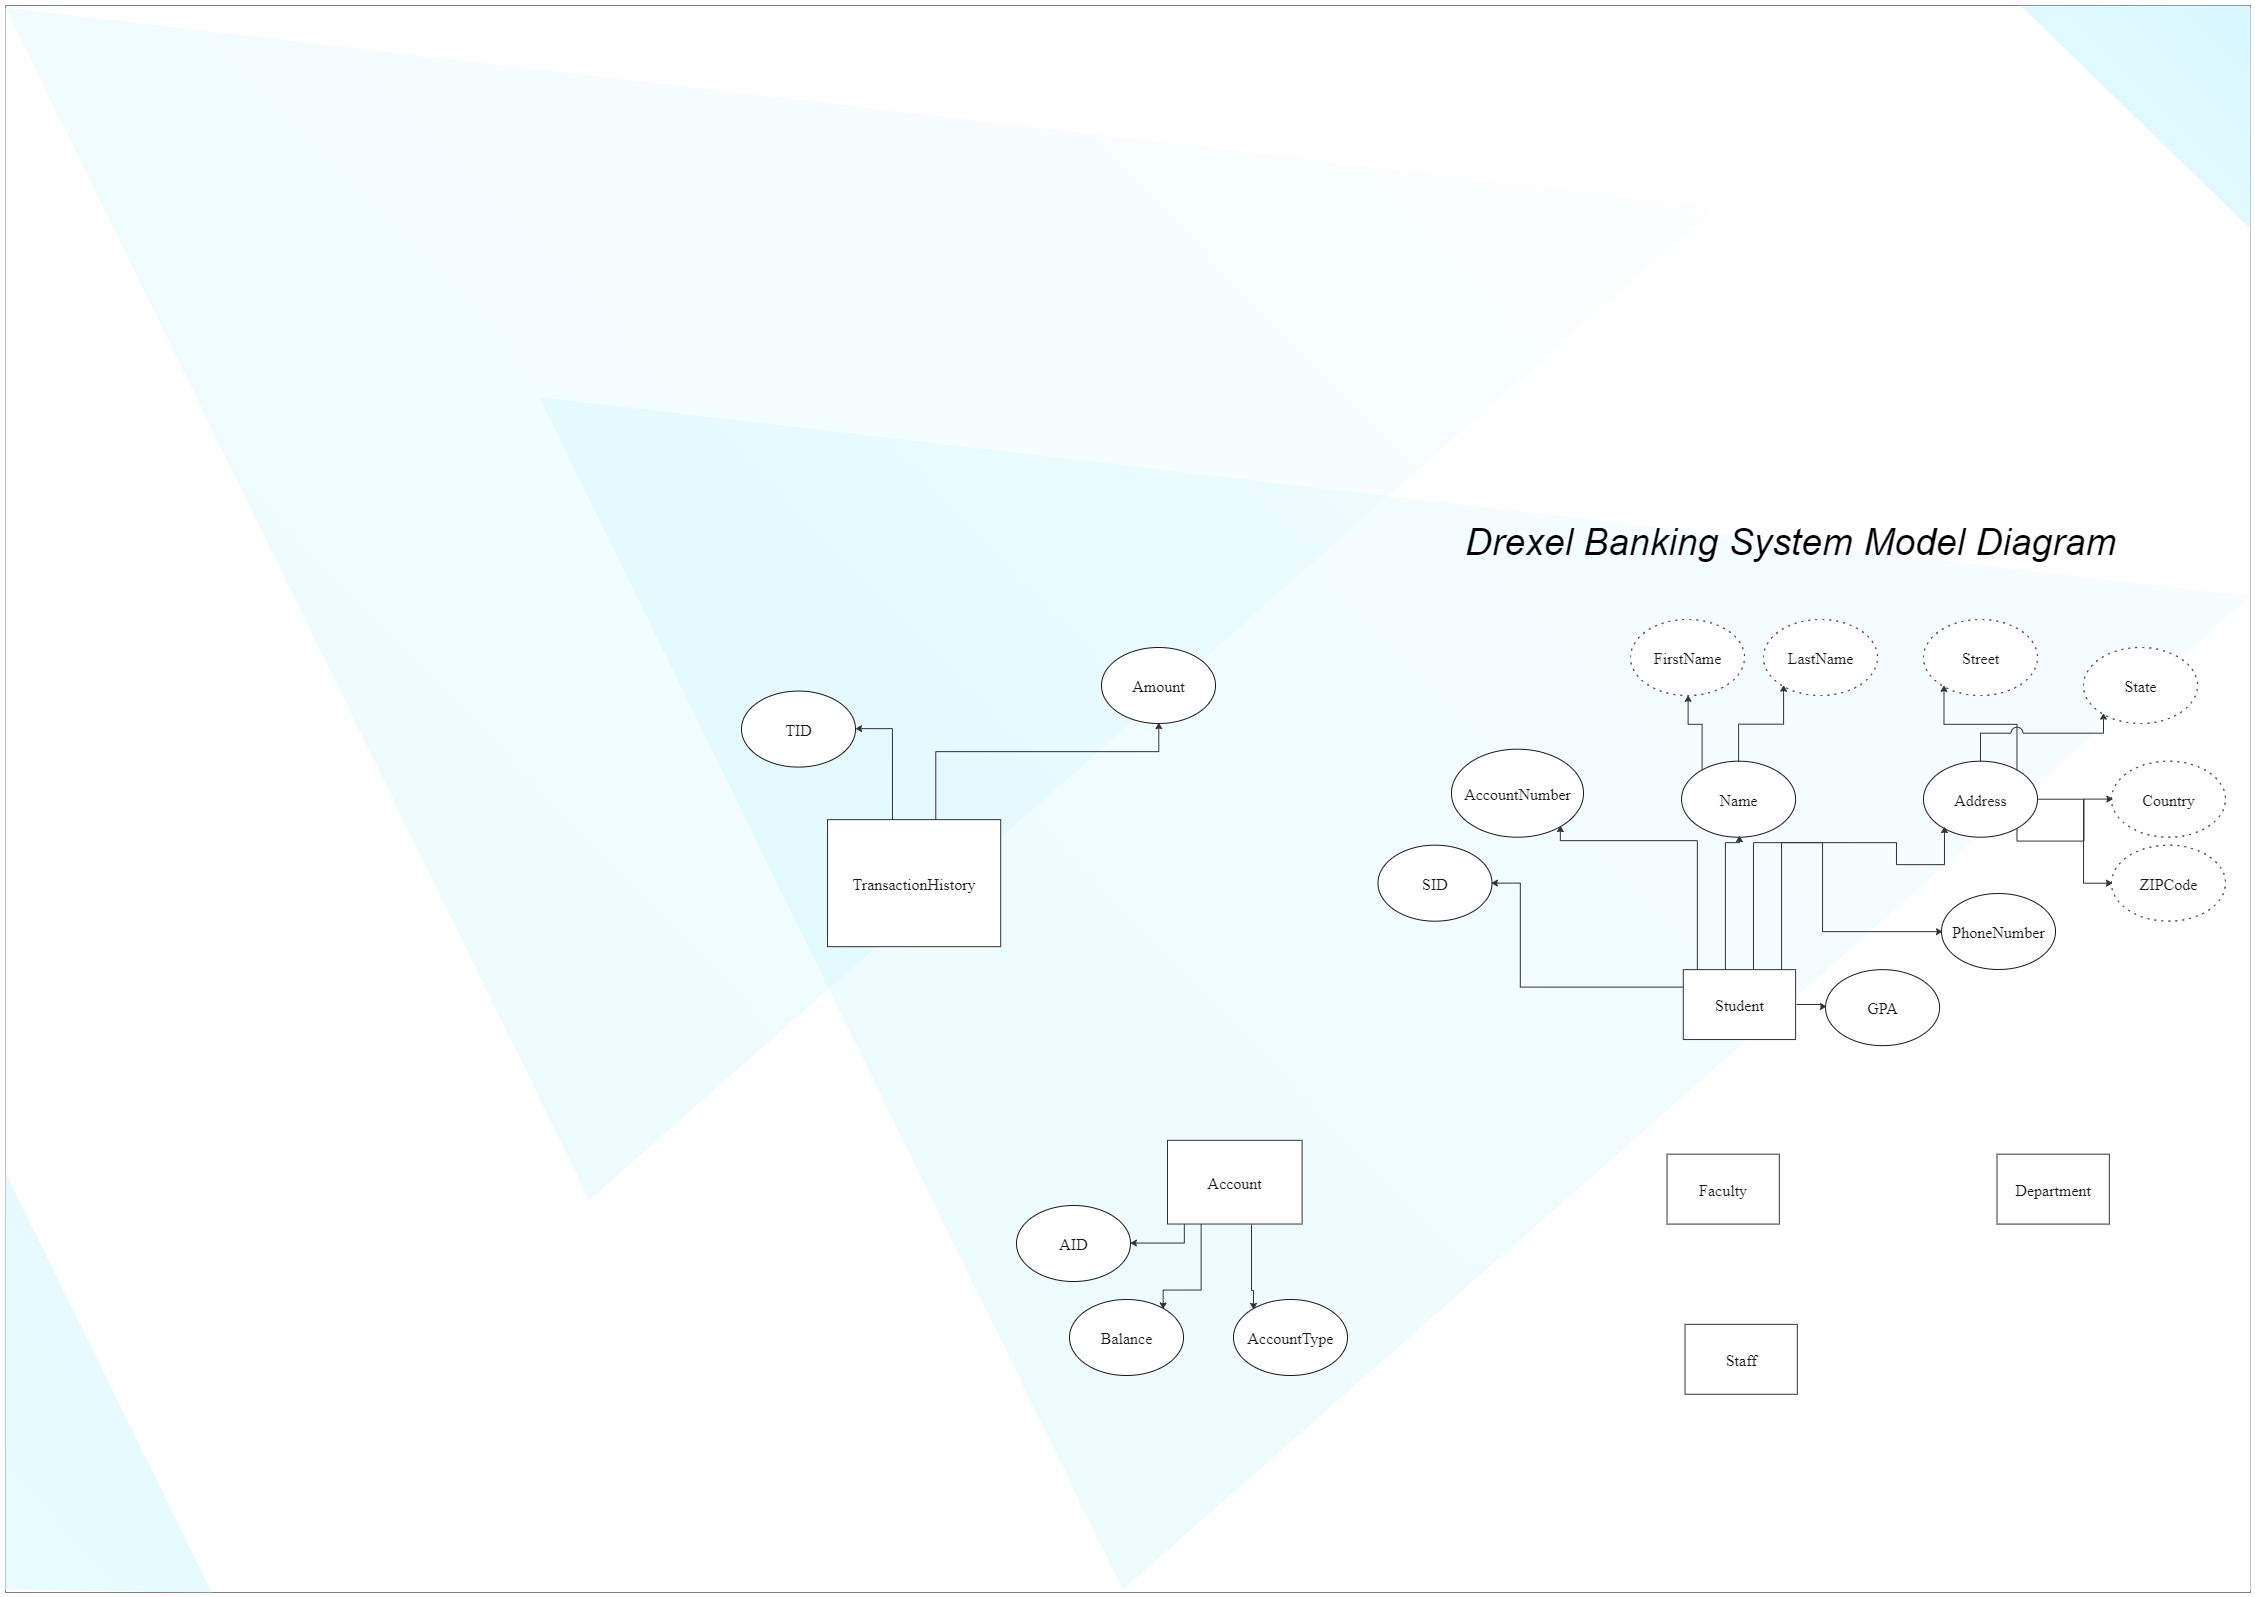 Drexel Banking System Model Diagram shows the important aspects of the banking system, like Student, Faculty, Staff, Department, Account, and Transaction History. The accounts can be opened in a branch in the Drexel Banking system. The branch gives a loan